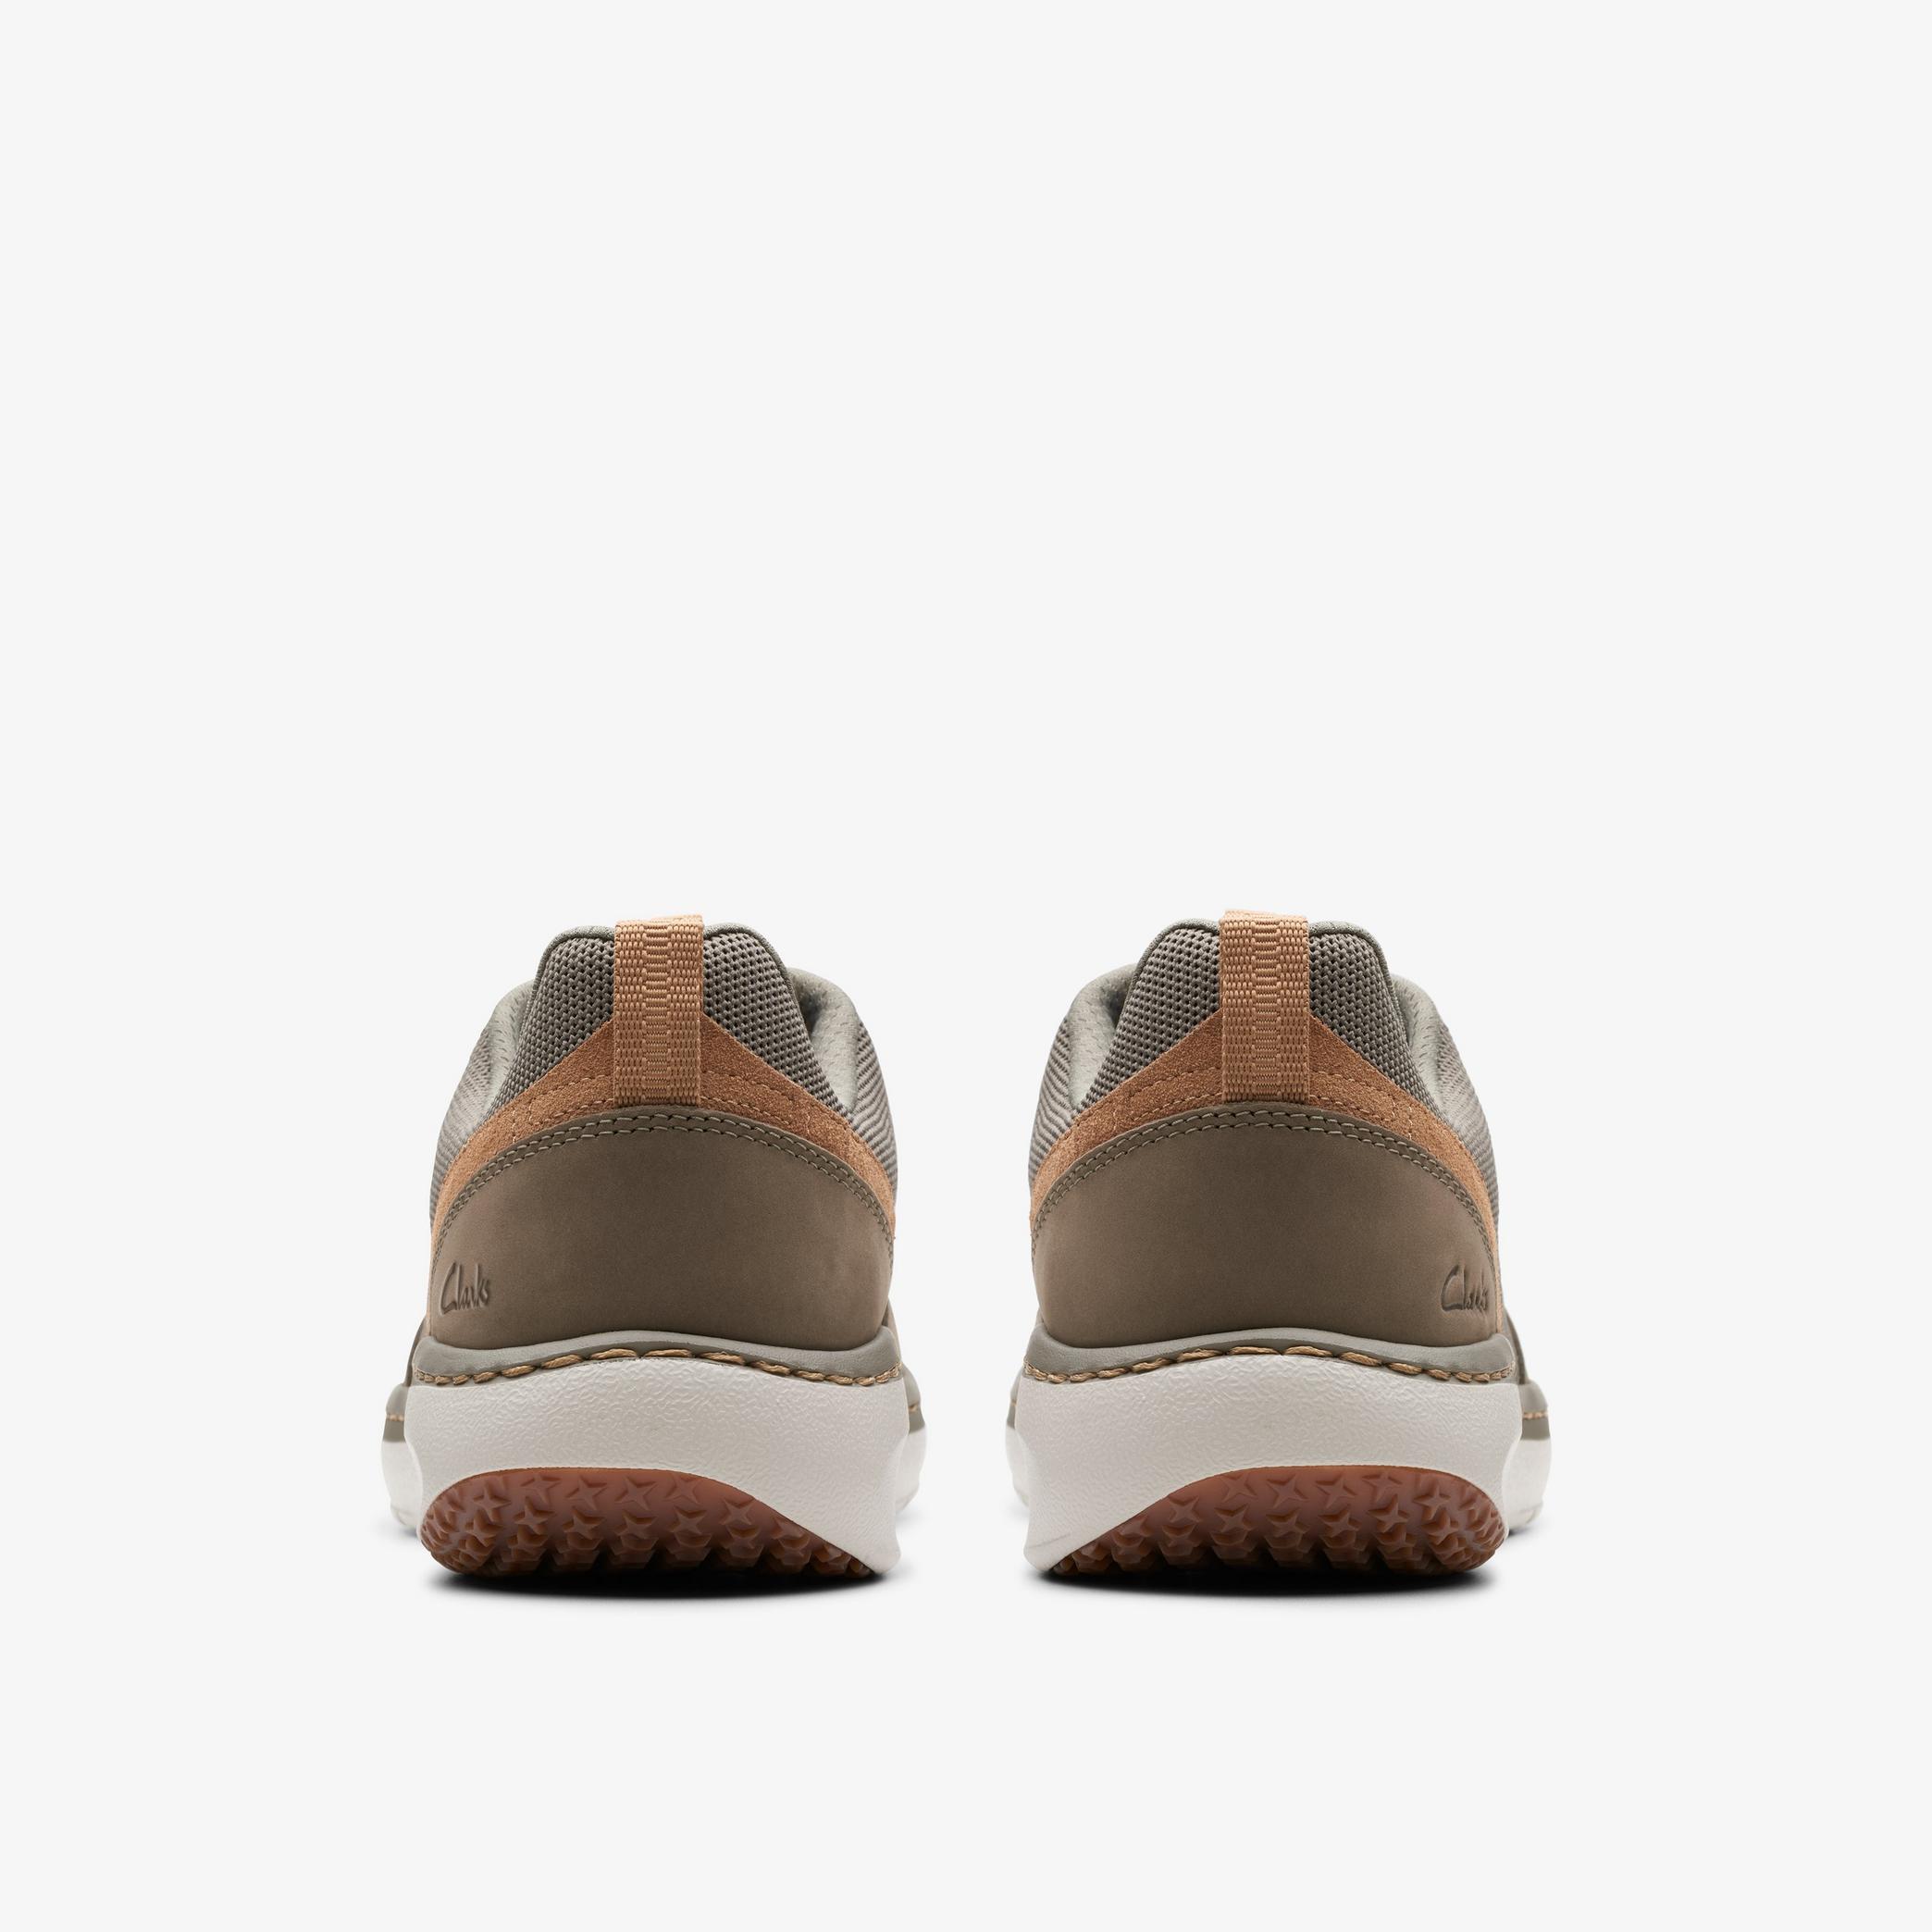 Clarks Pro Knit Stone Combination Sneakers, view 5 of 6